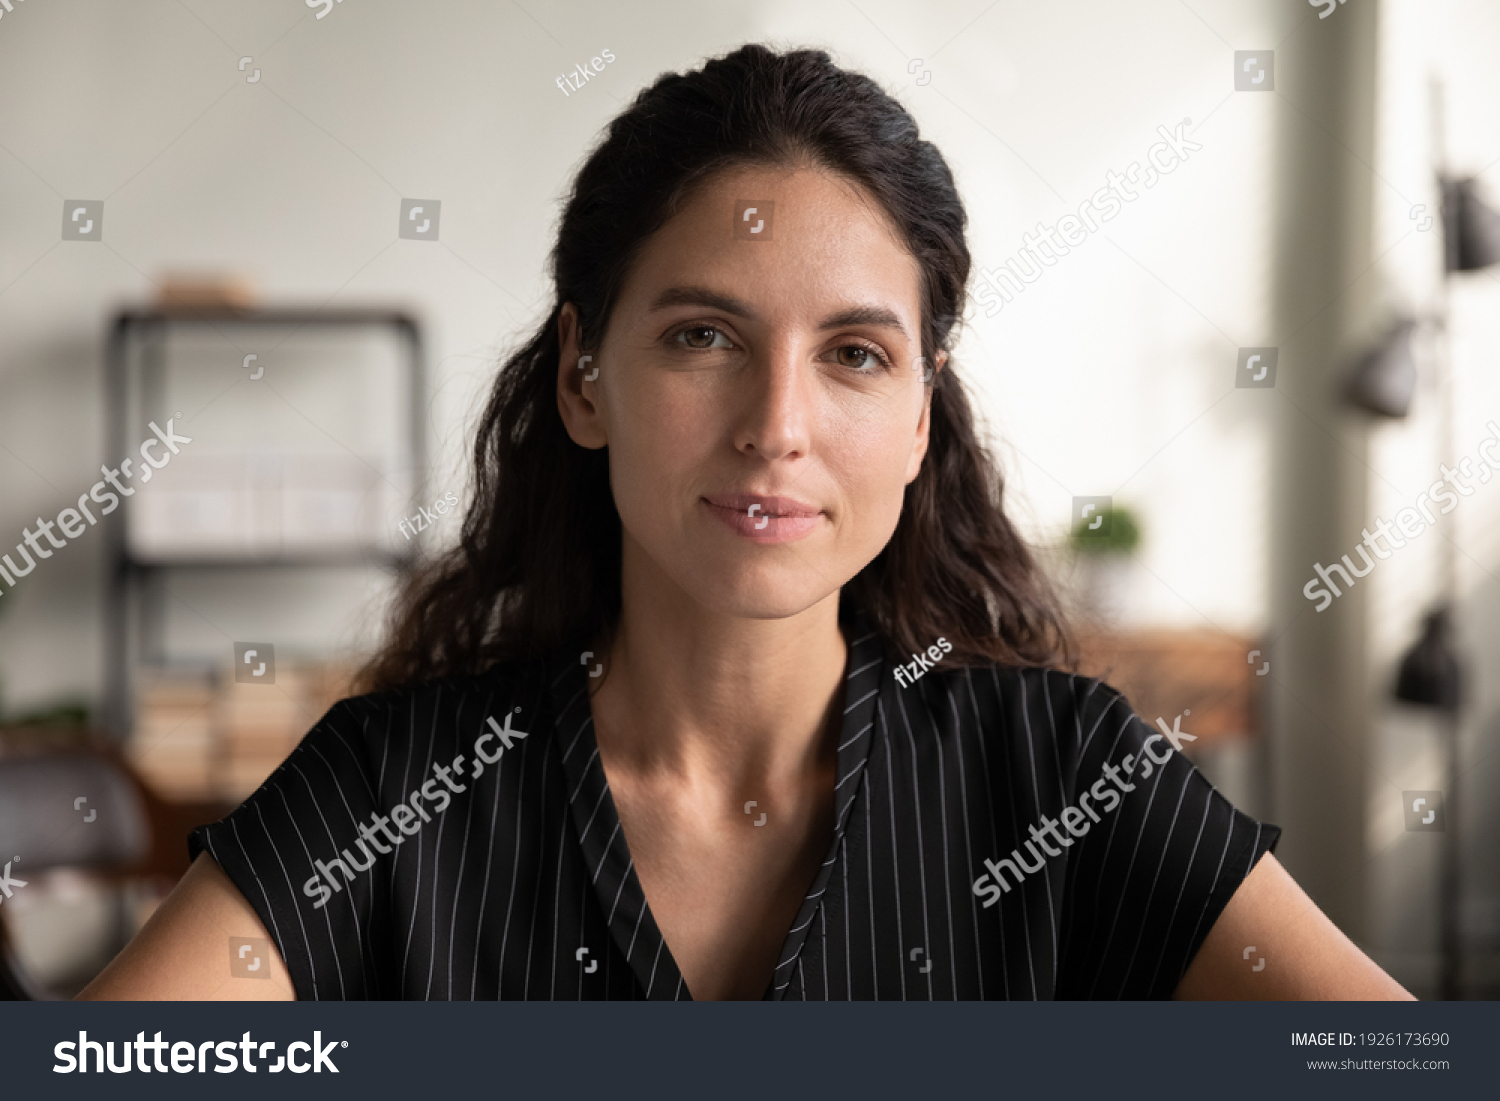 Head shot portrait close up confident woman looking at camera, posing for profile picture, businesswoman making video call to business partner, teacher coach shooting webinar, online course #1926173690